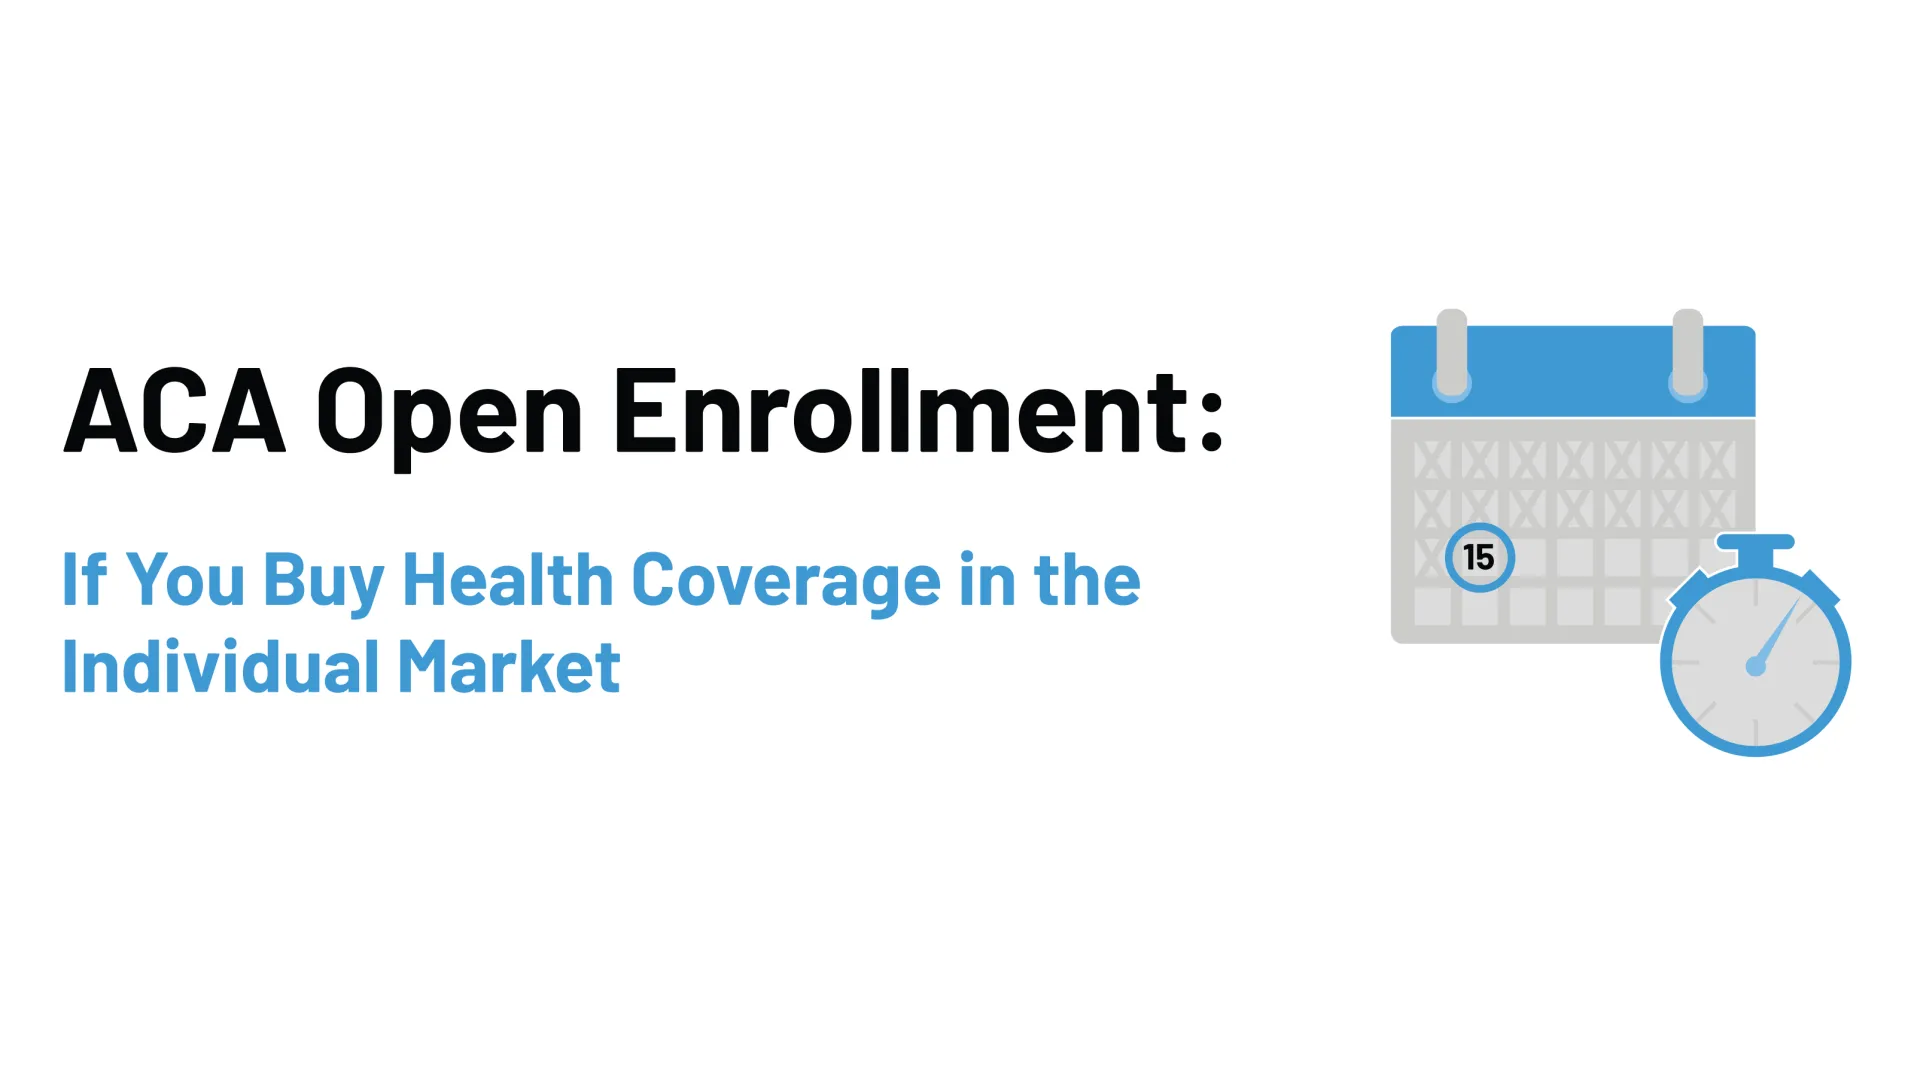 4.6M Cross Enrollees to be Seen in the ACA Marketplace Open Enrollment